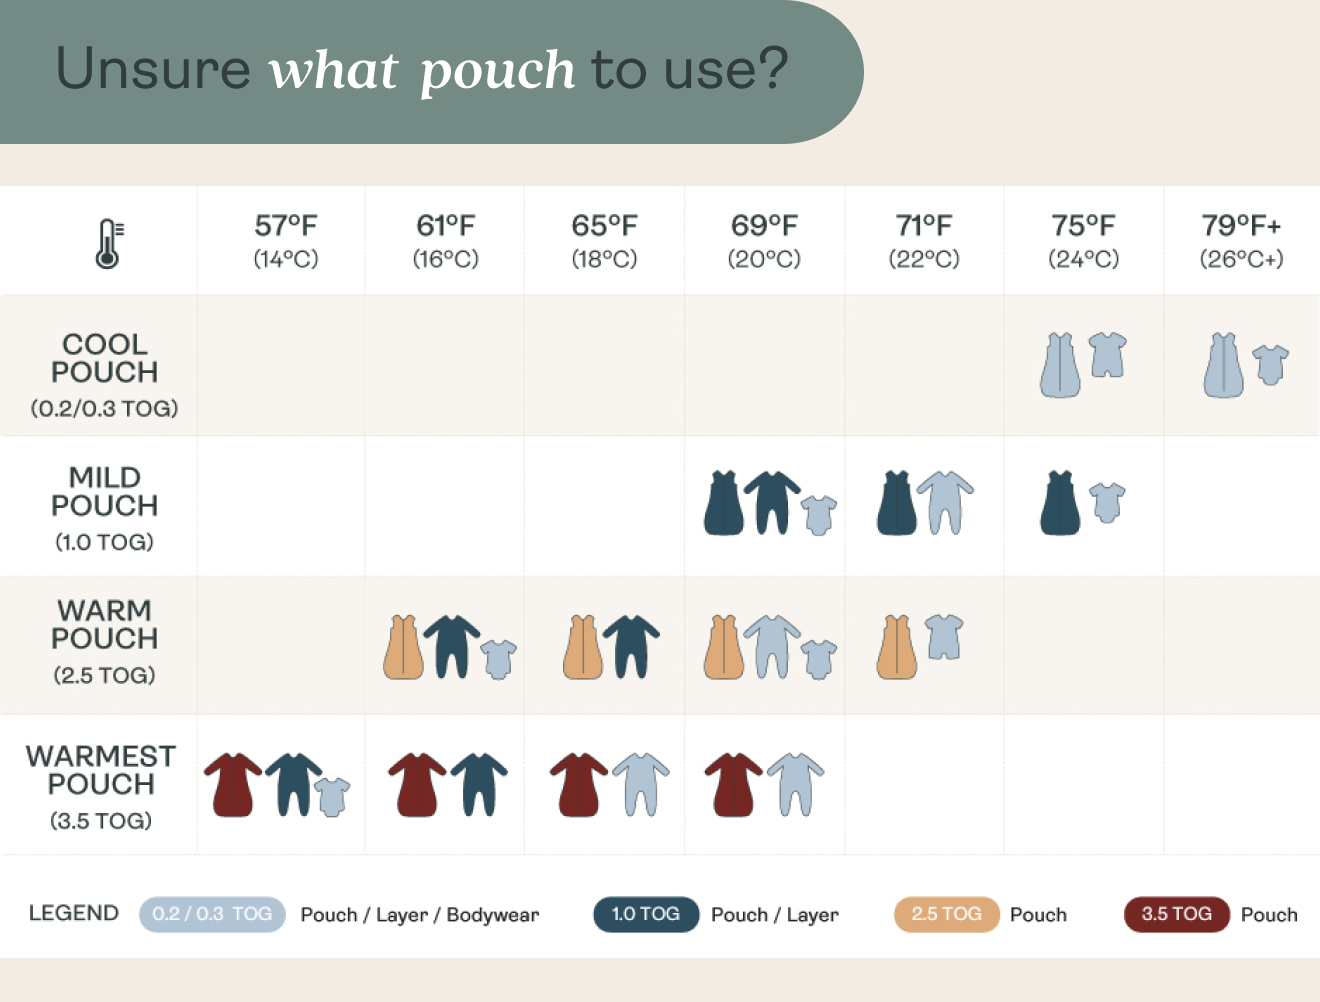 ergoPouch TOG rating chart for baby sleepwear in the UK